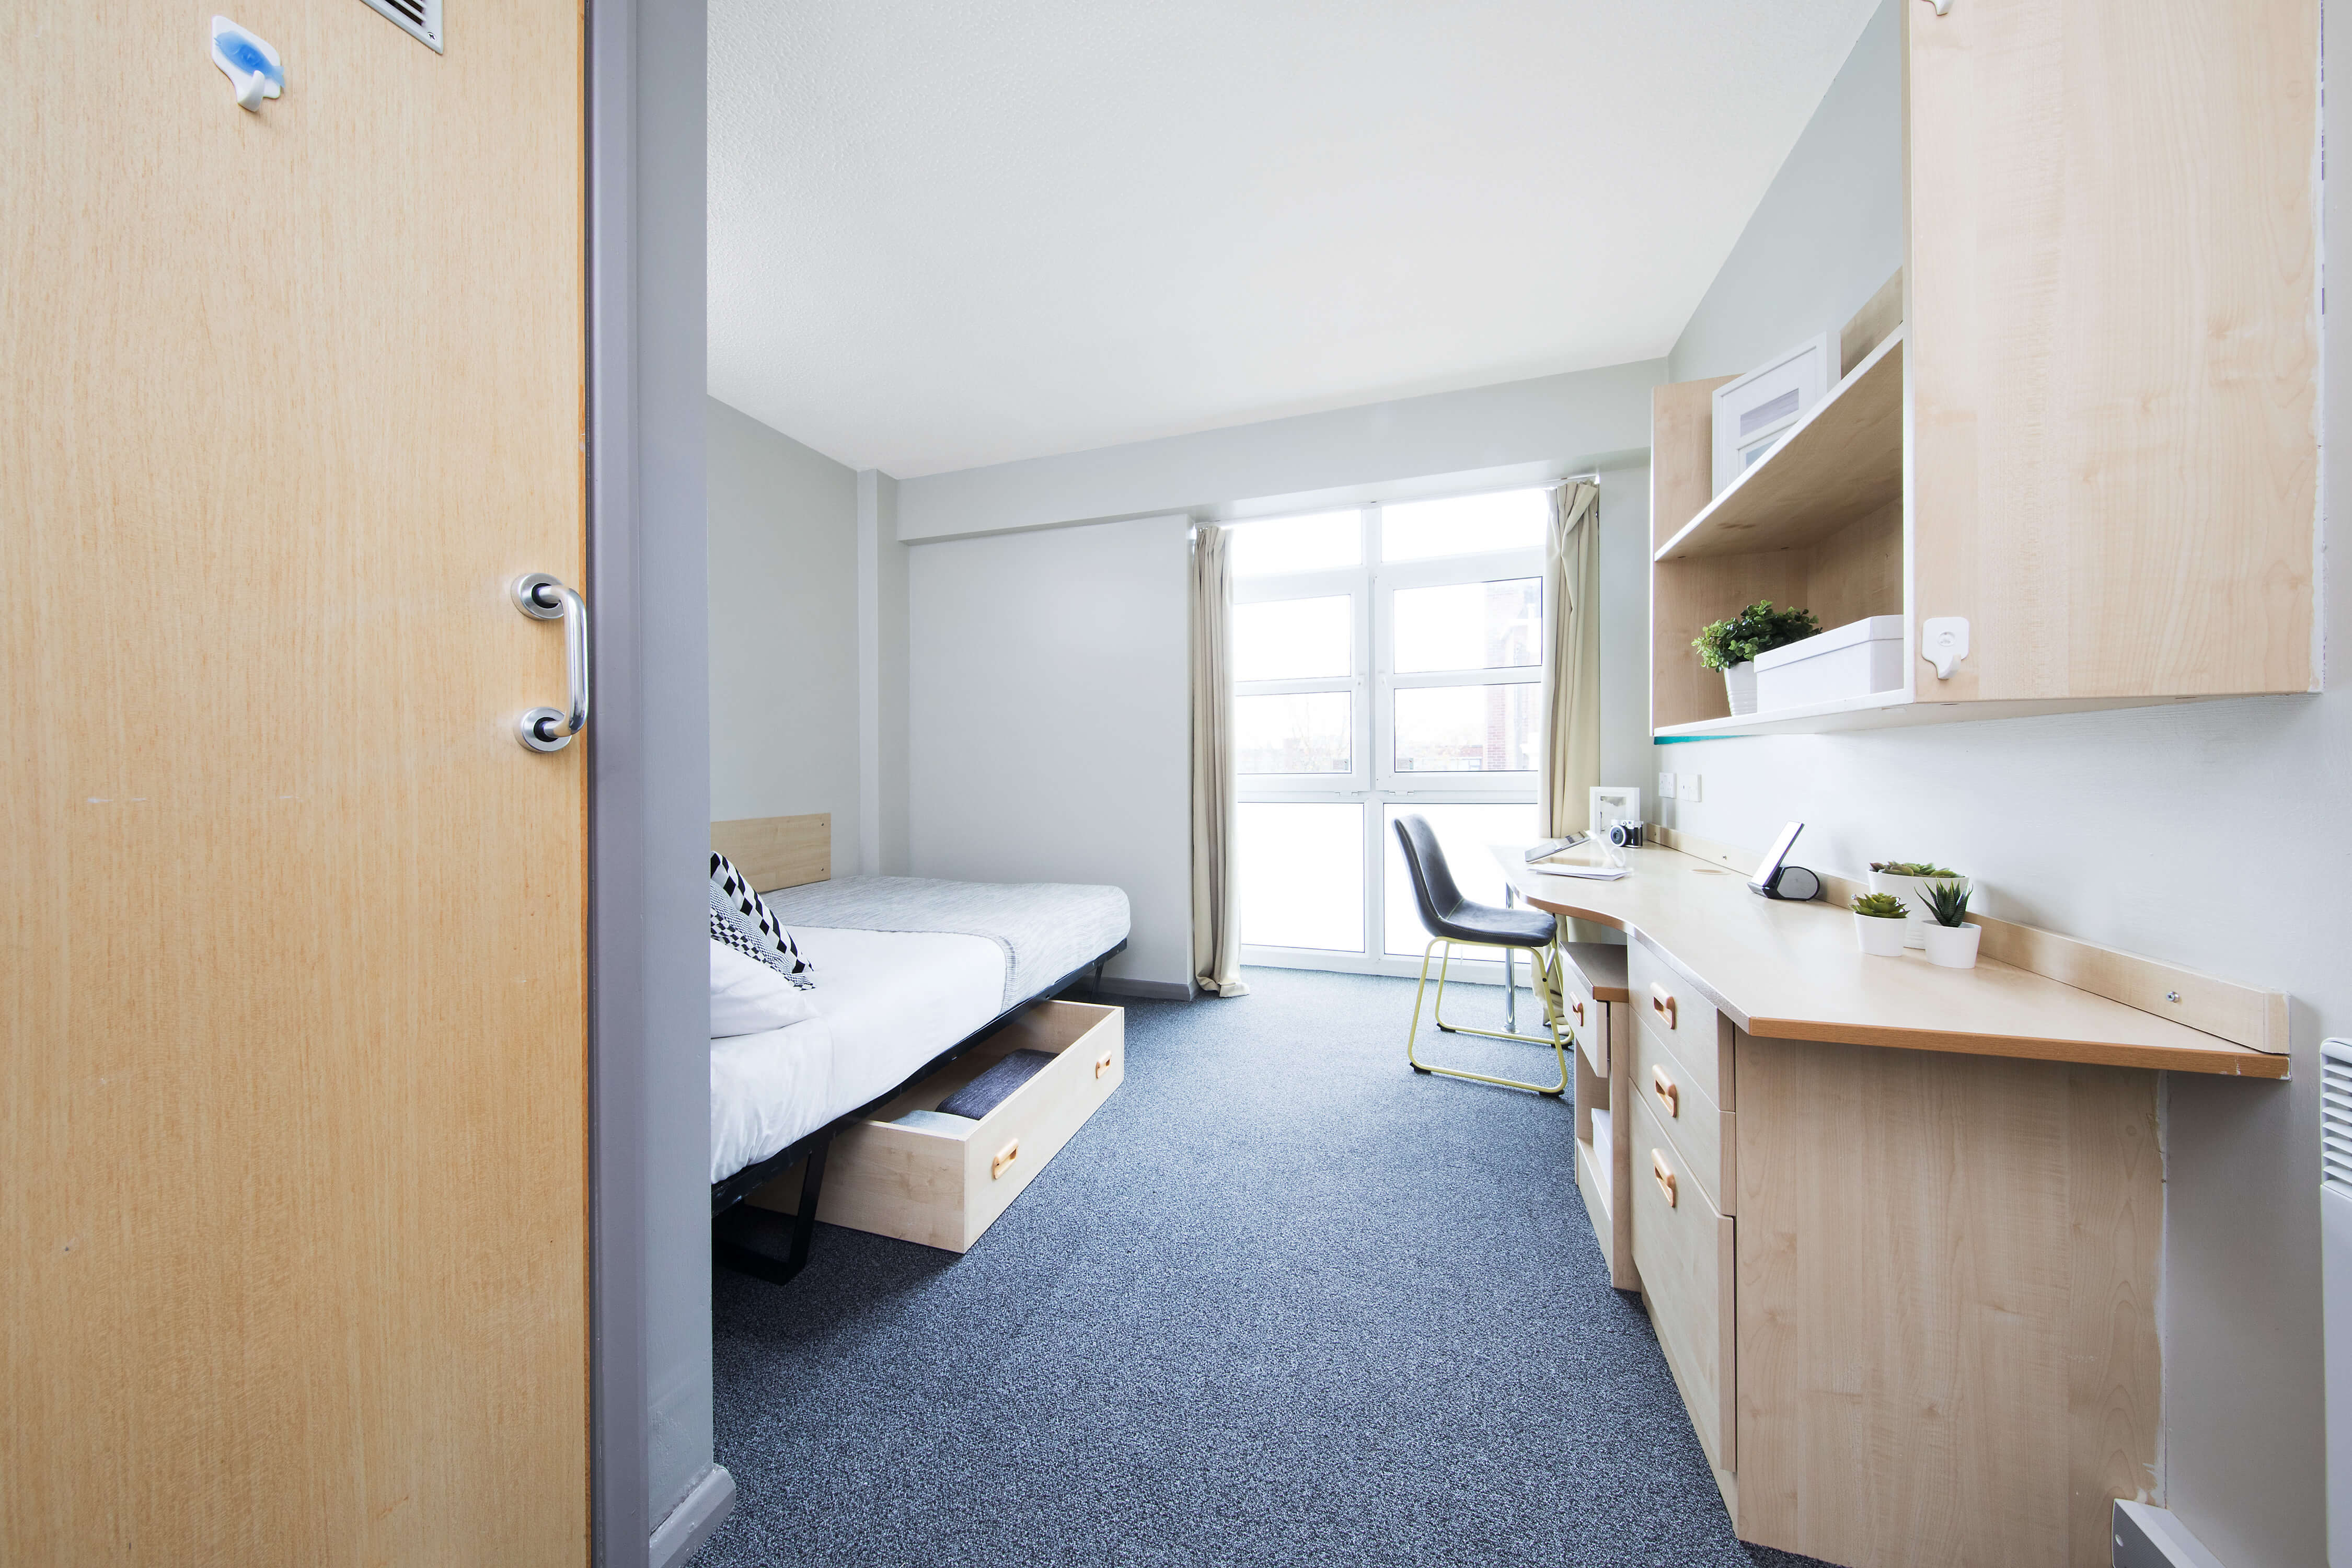 Bed and study space in en-suite room